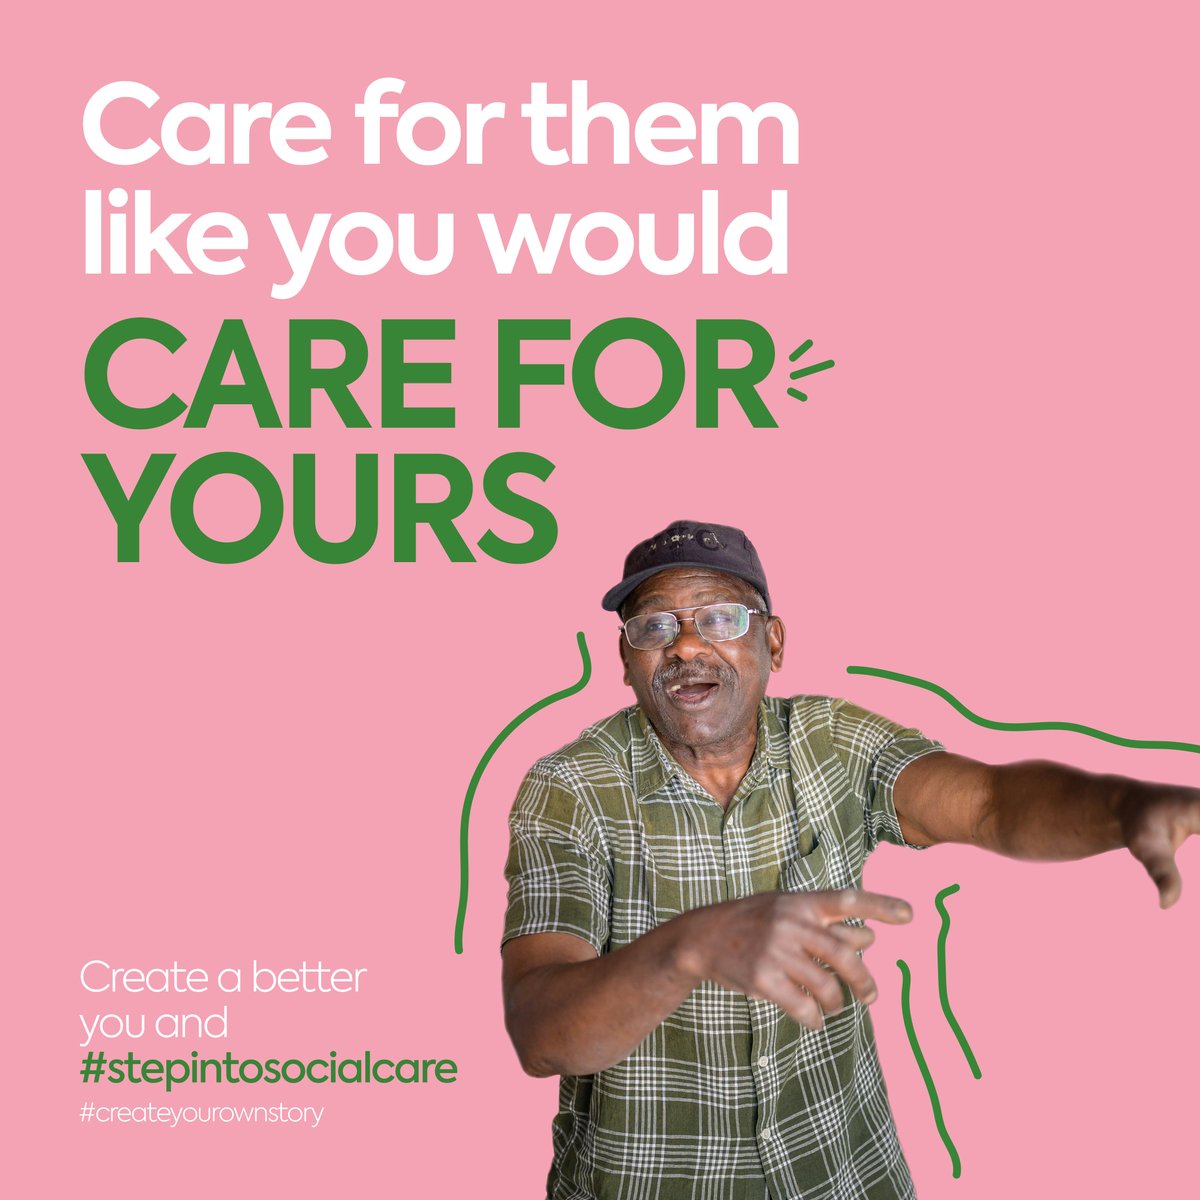 test Twitter Media - Care for them like you would care for yours.  Be selfless, and care for those in need as much as you can, by starting a career in social care.  Create a better you and #stepintosocialcare
.
.
.
.
.
#createyourownstory #homecare
@Care_Jobs_UK 
@UKCareRoles 
@TimetoChange https://t.co/HLEyEuIN8v